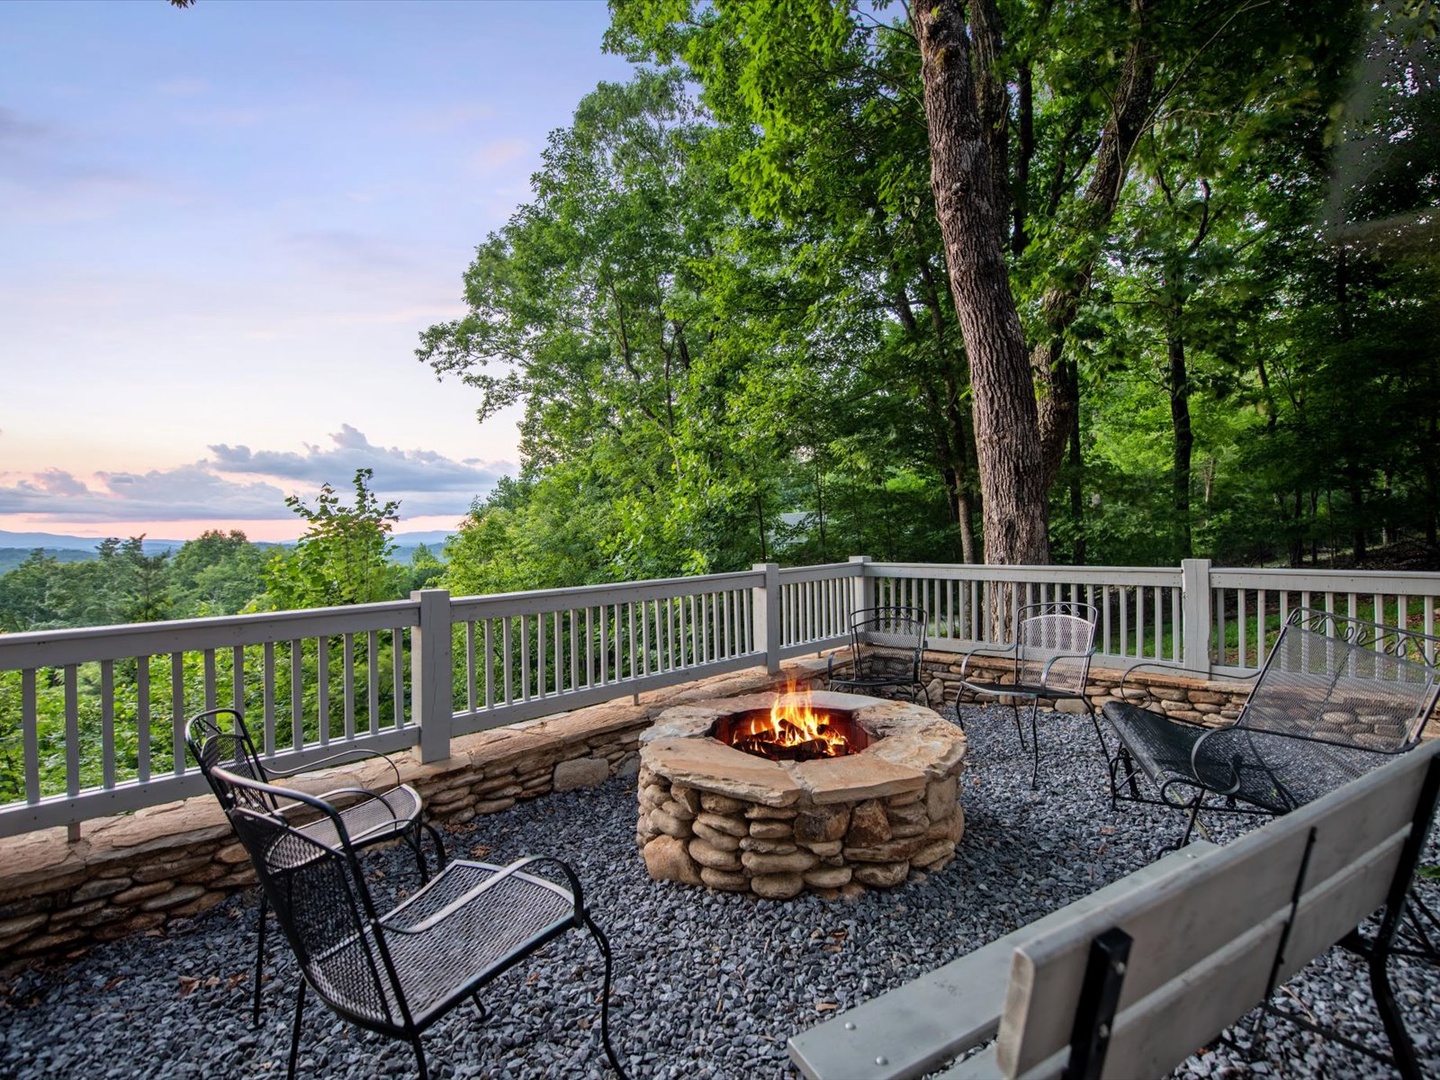 Aska Bliss- Stone firepit with the mountain view and outdoor seating